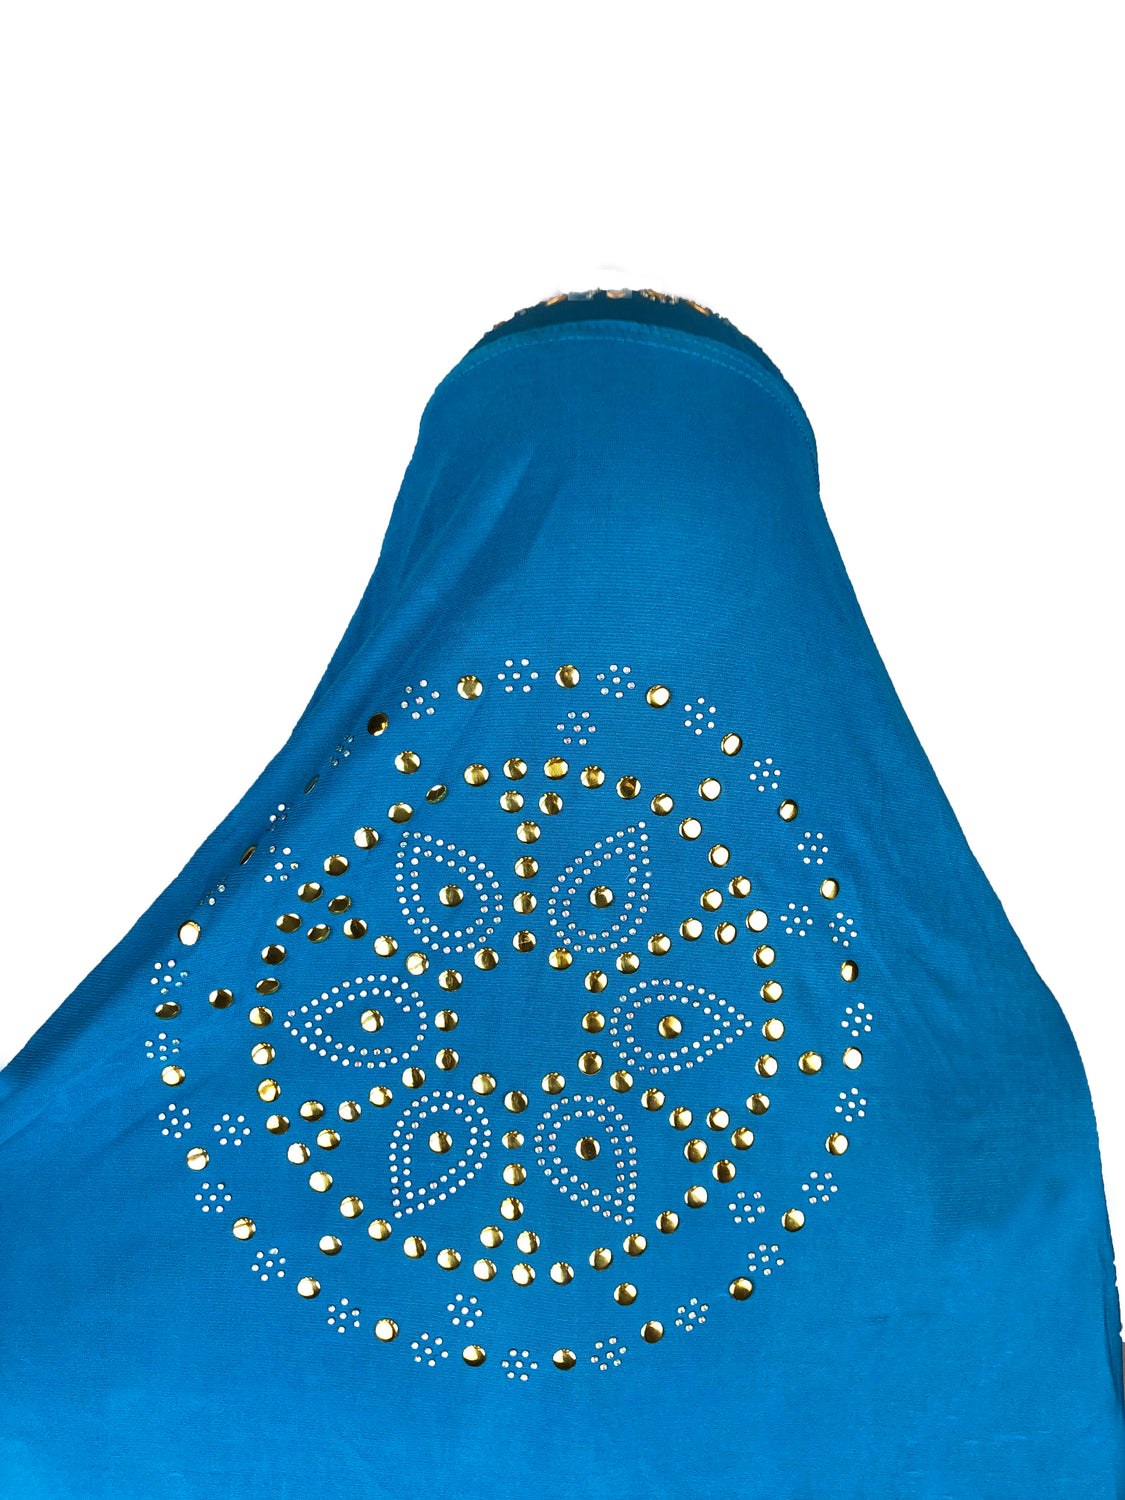 long blue one piece slip on hijab with jewels